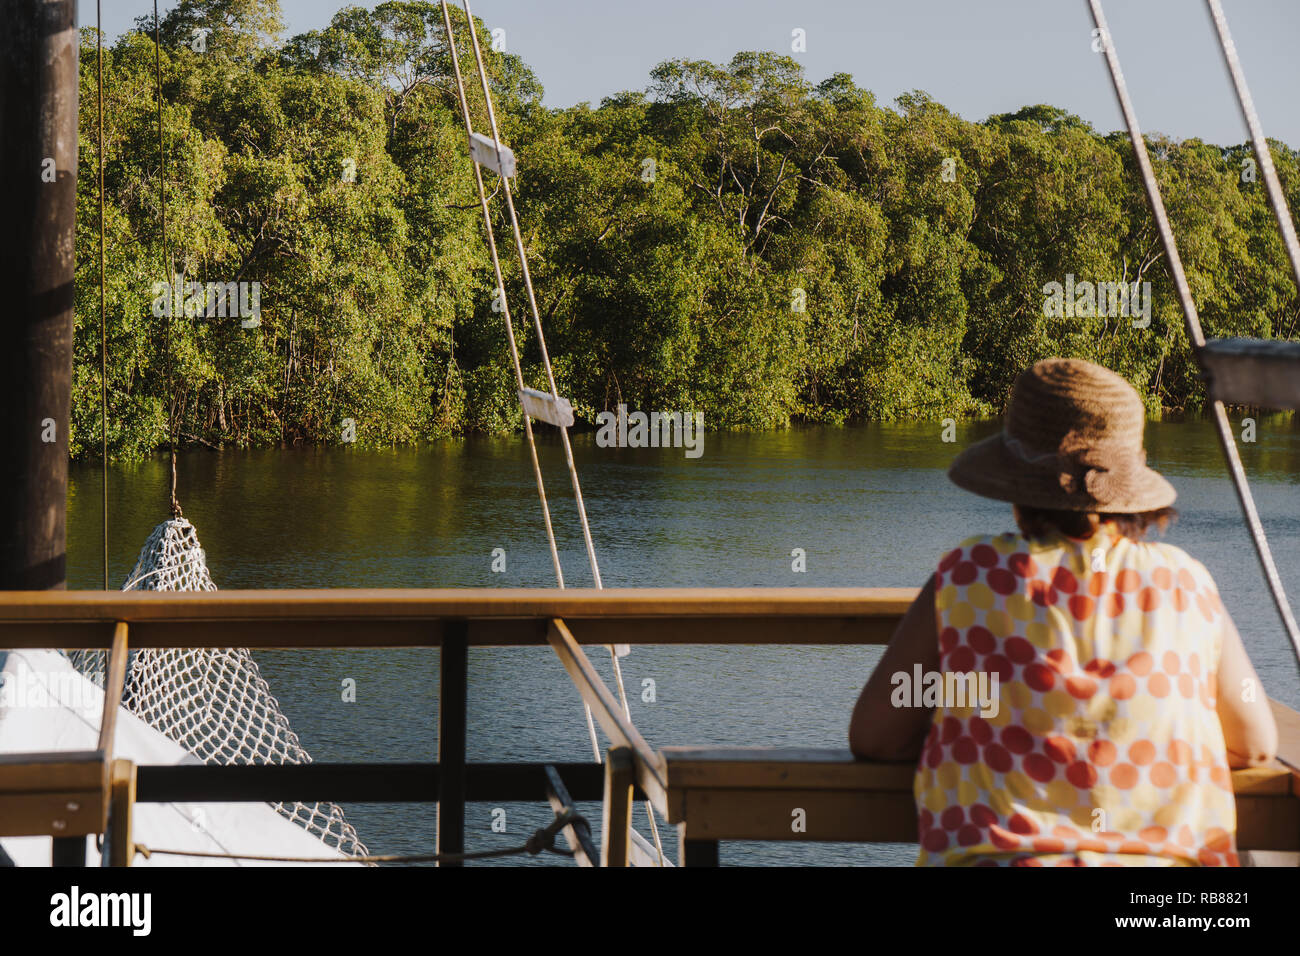 backside view of female tourist on a cruise ship looking towards the mangrove forest Stock Photo